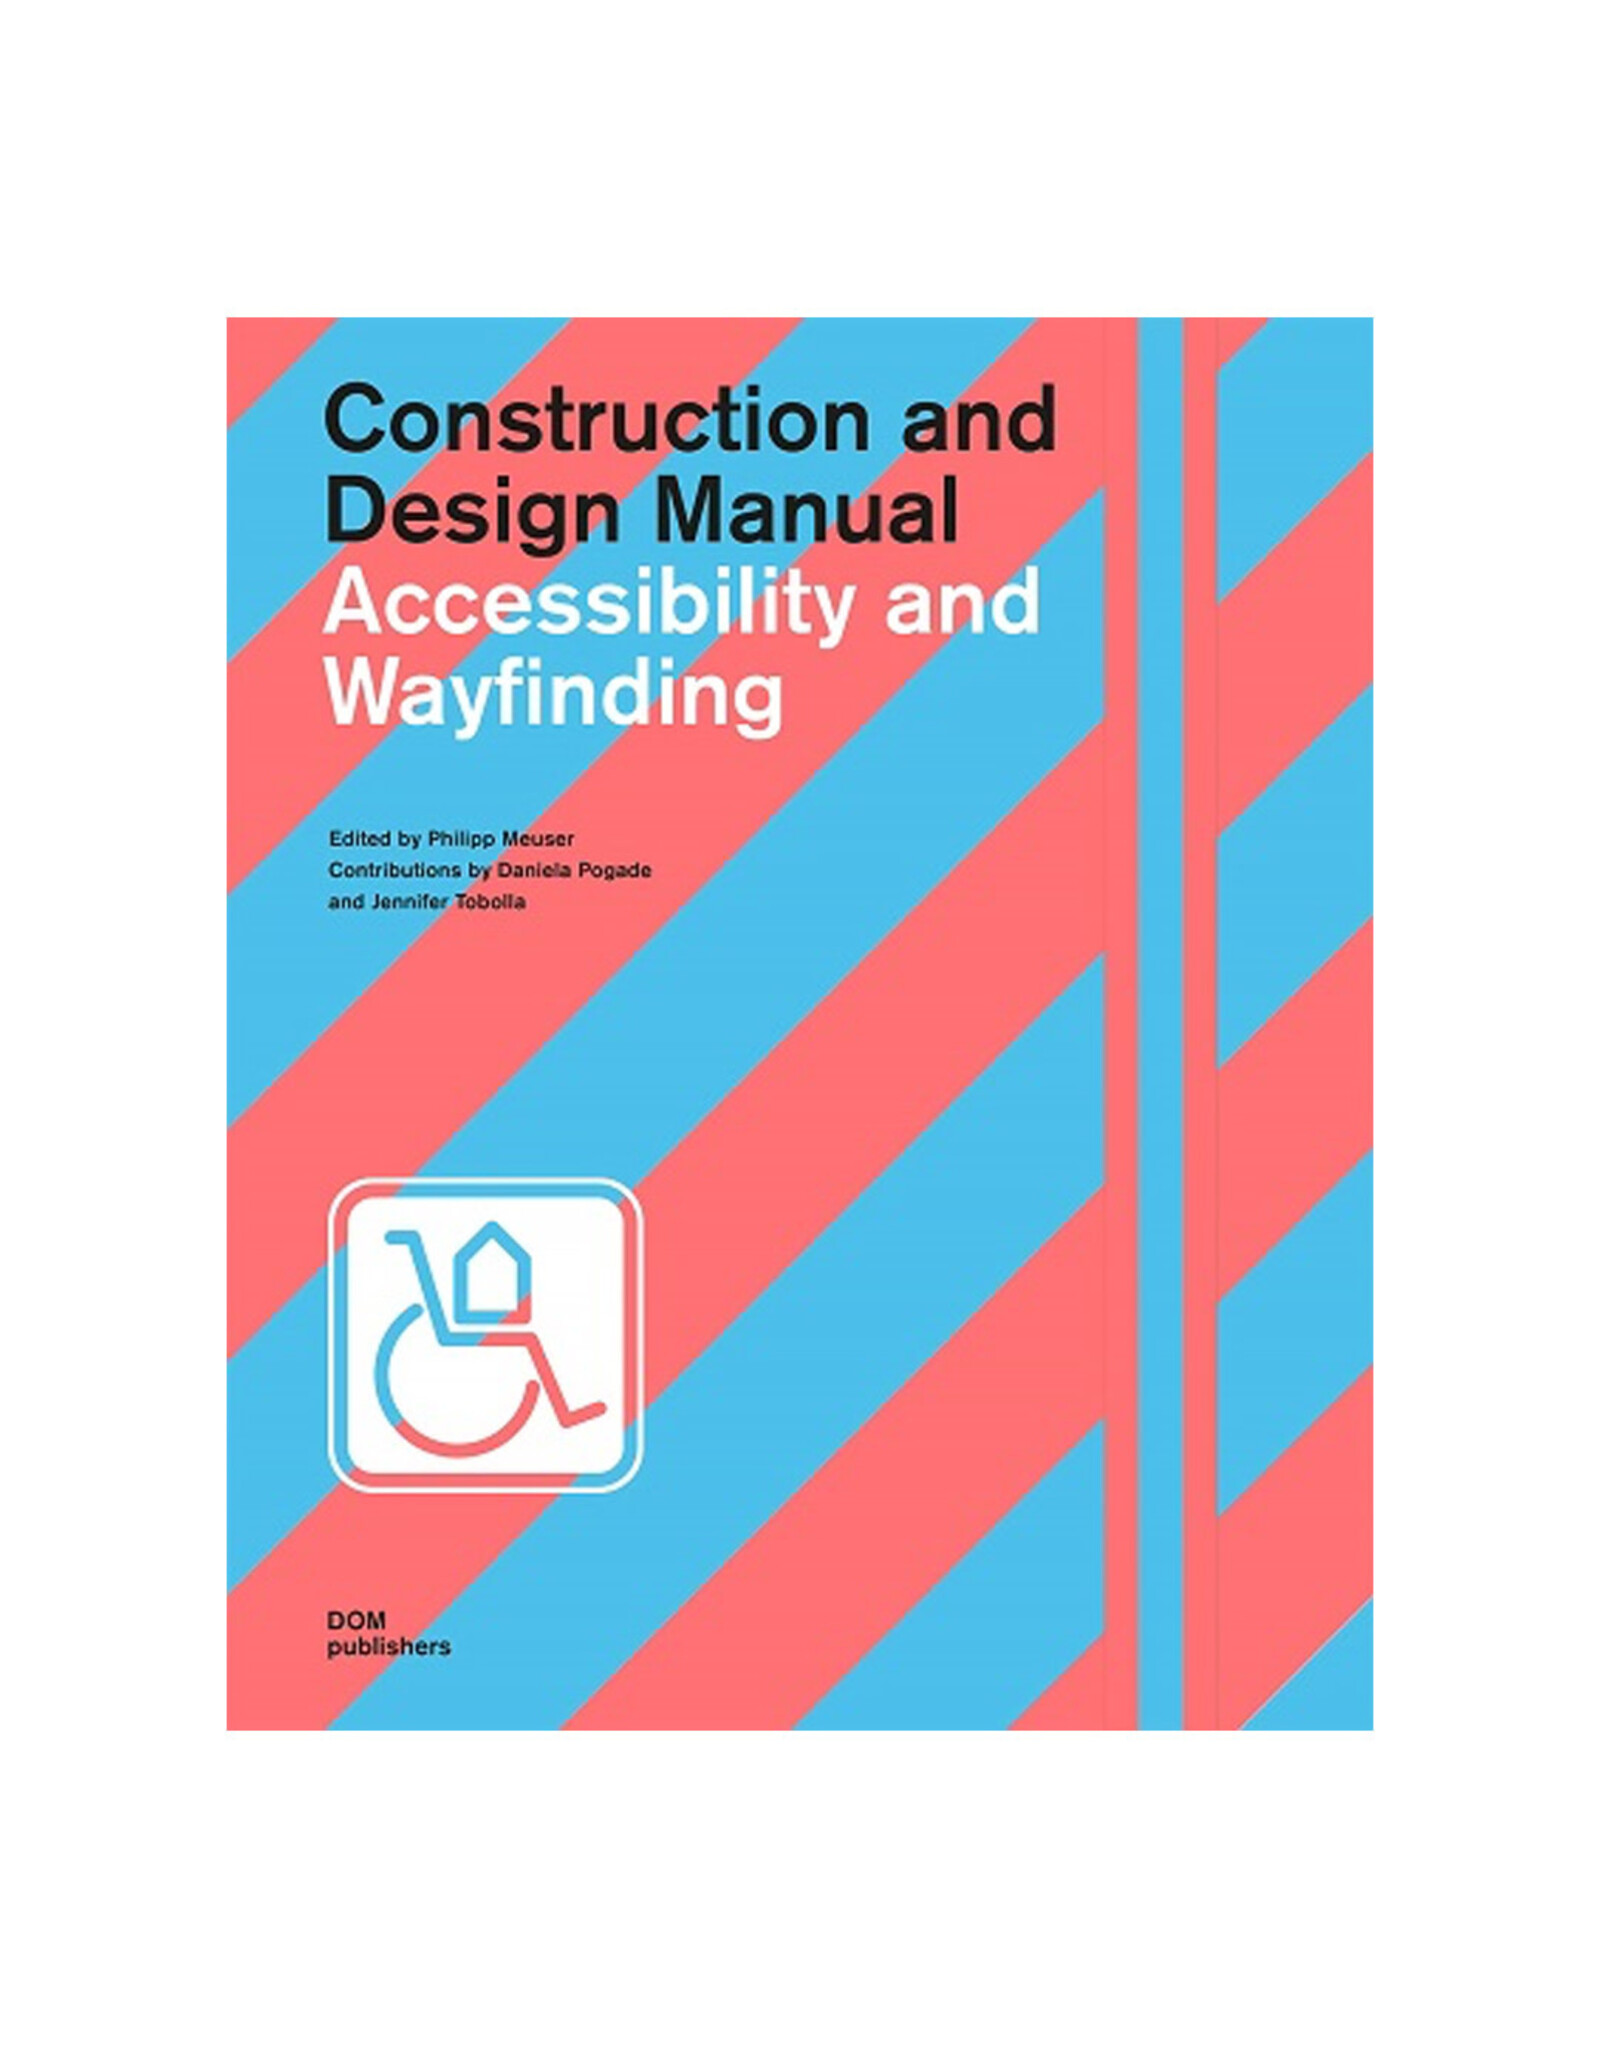 Construction and Design Manual Accessibility and Wayfinding